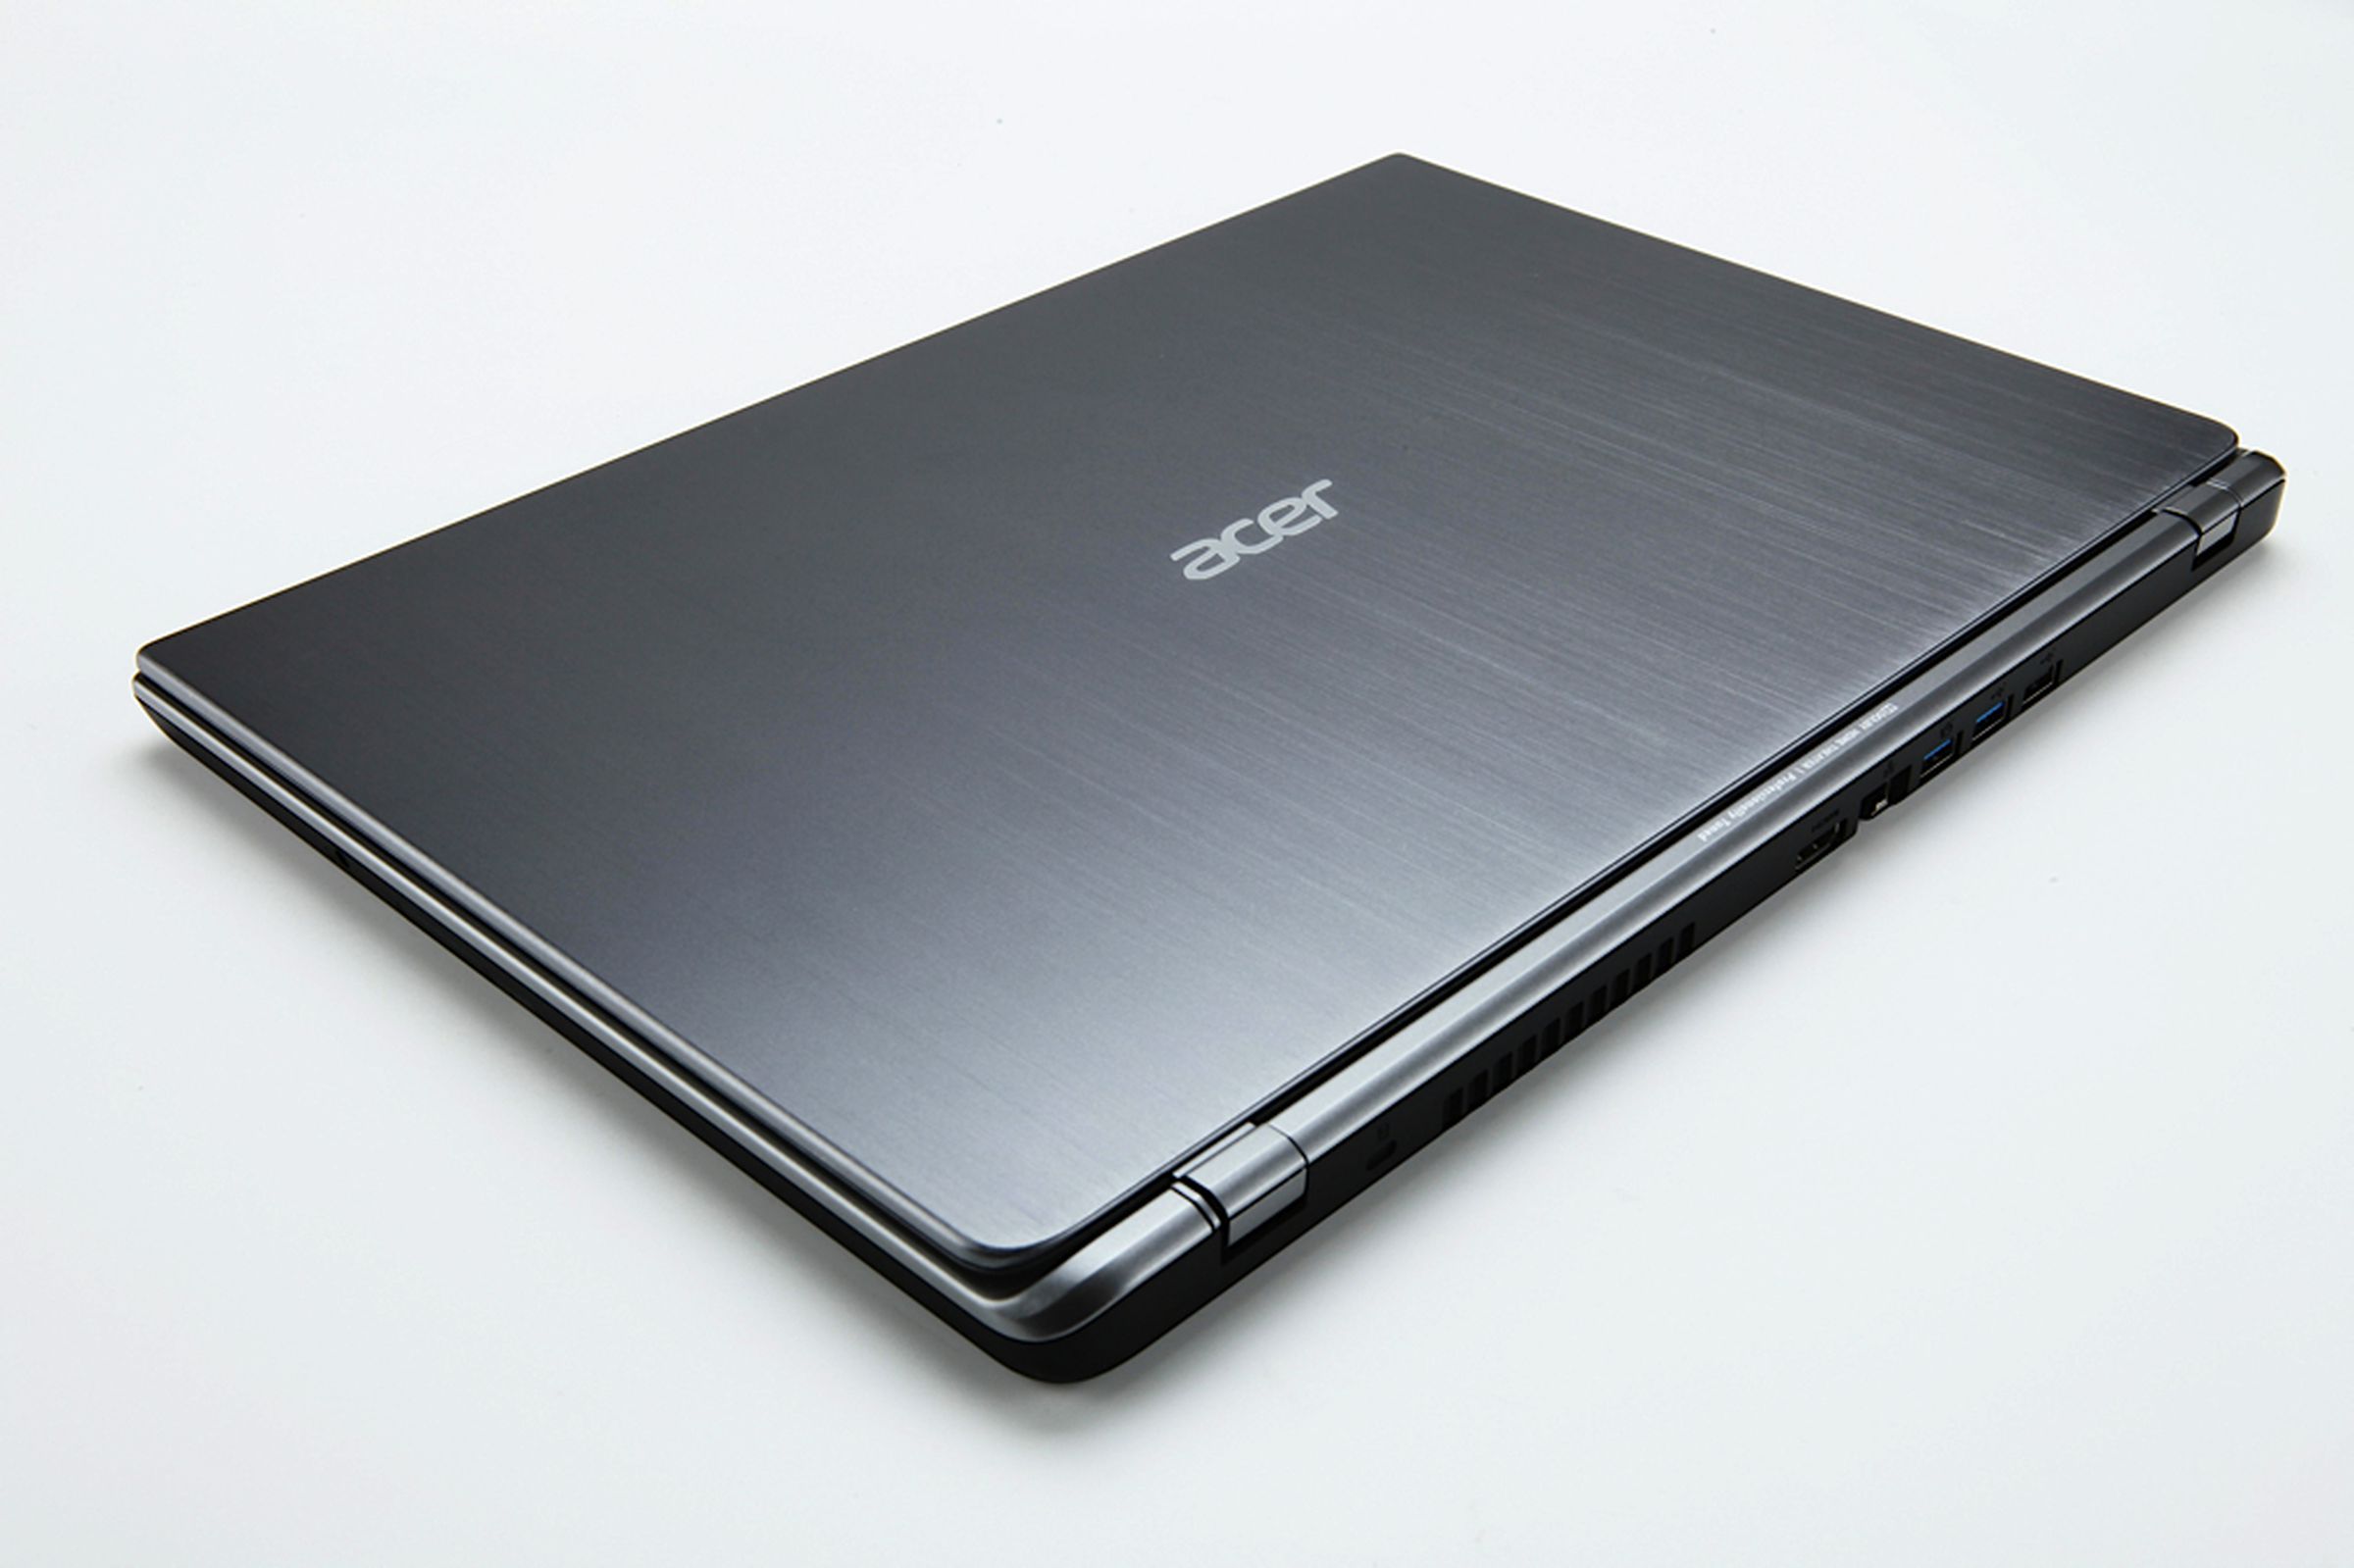 Acer Timeline Ultra press photos (14- and 15-inch)